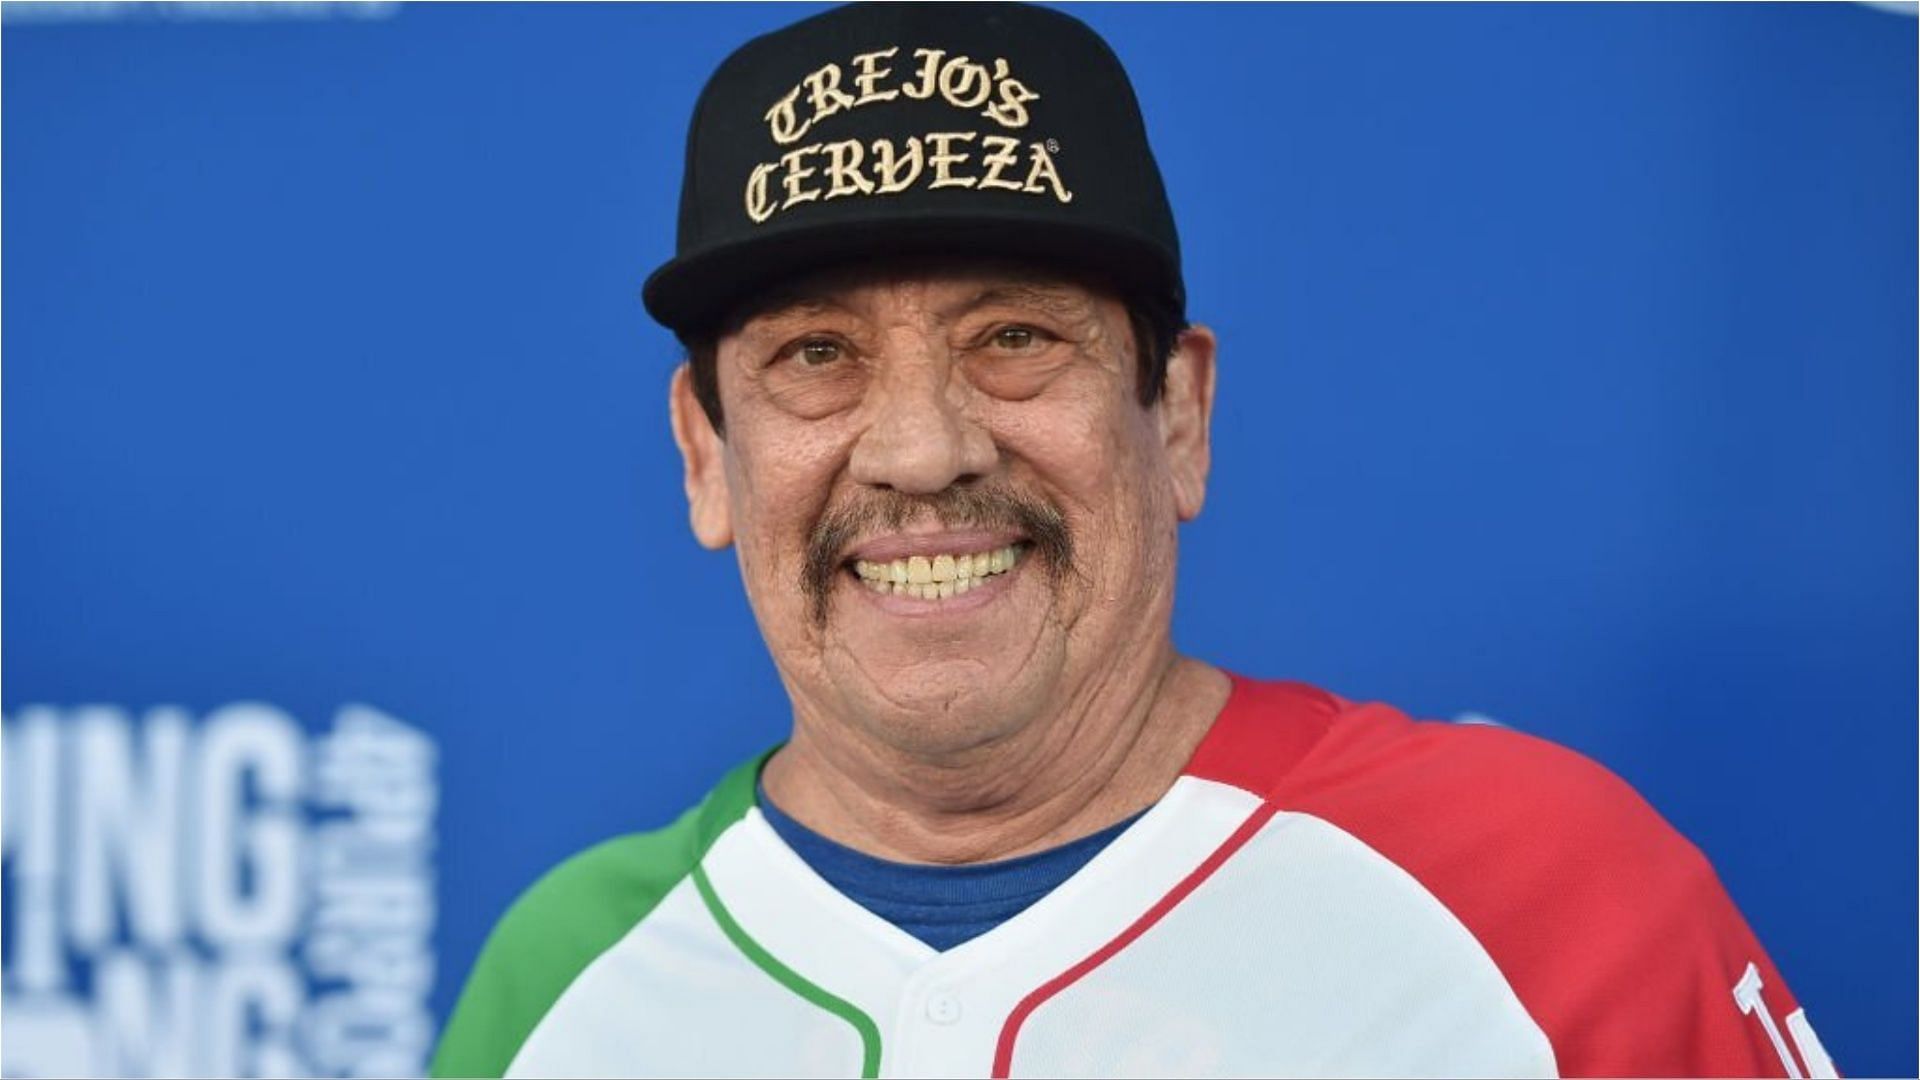 Danny Trejo recently celebrated his sobriety by sharing a picture on Instagram (Image via Alberto E. Rodriguez/Getty Images)